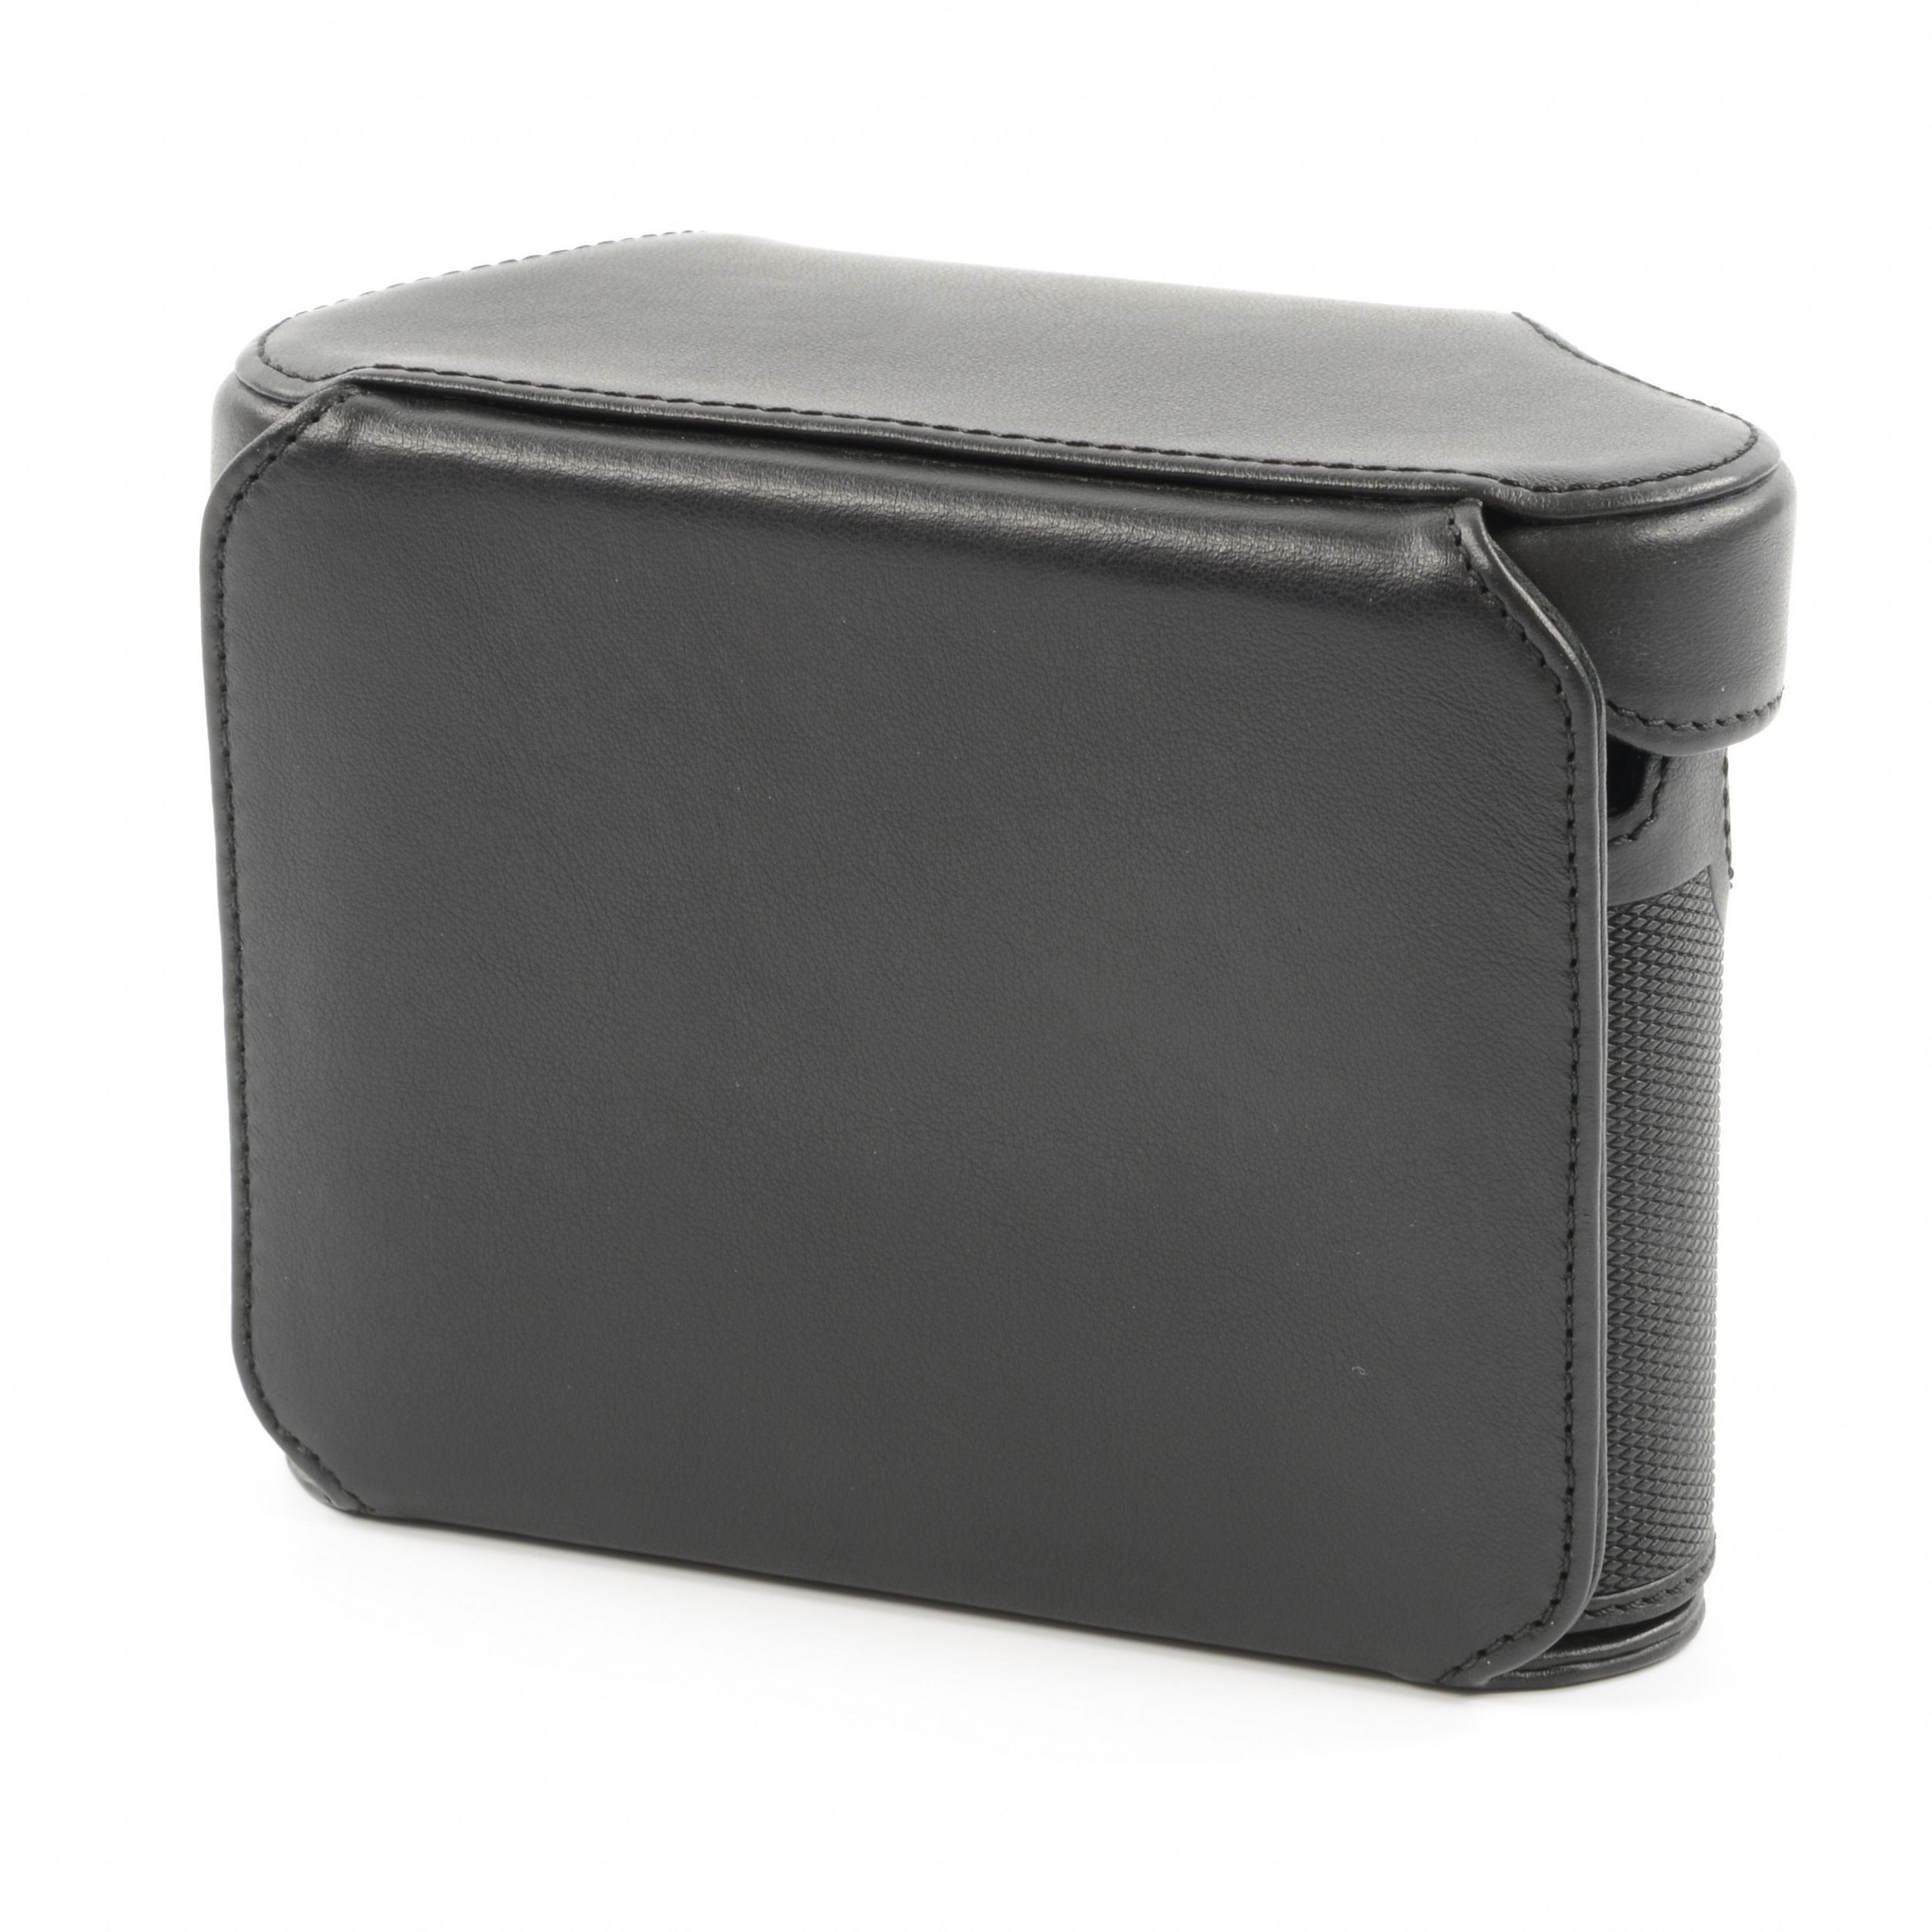 Leica Q Typ 116 Every Ready Case Black Leather + Box - Leica - Products